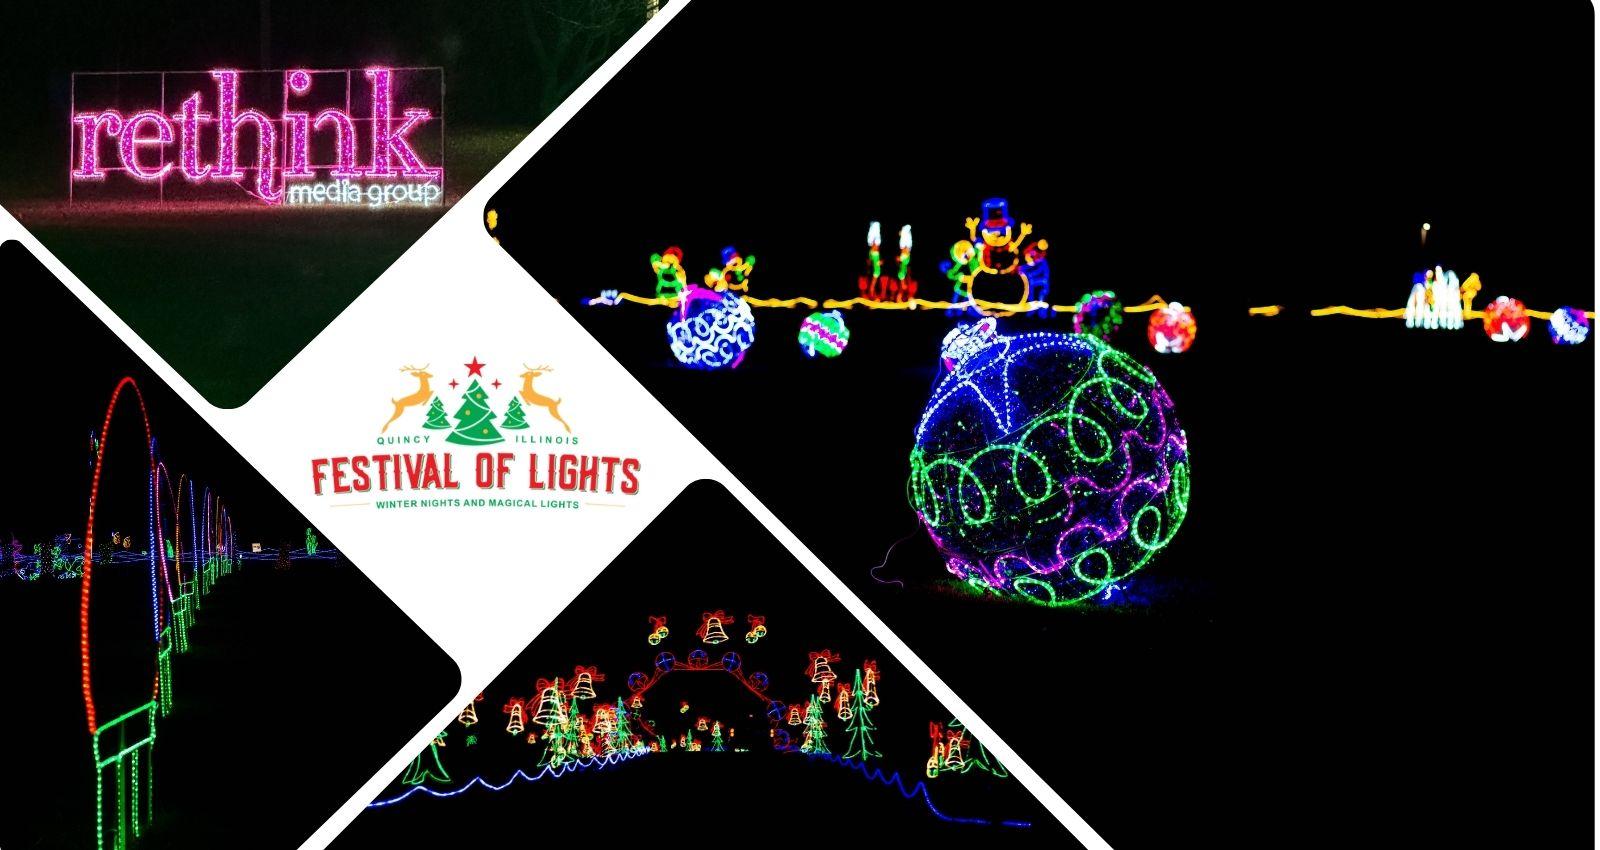 Rethink Media - Festival of Lights Case Study - Quincy, IL